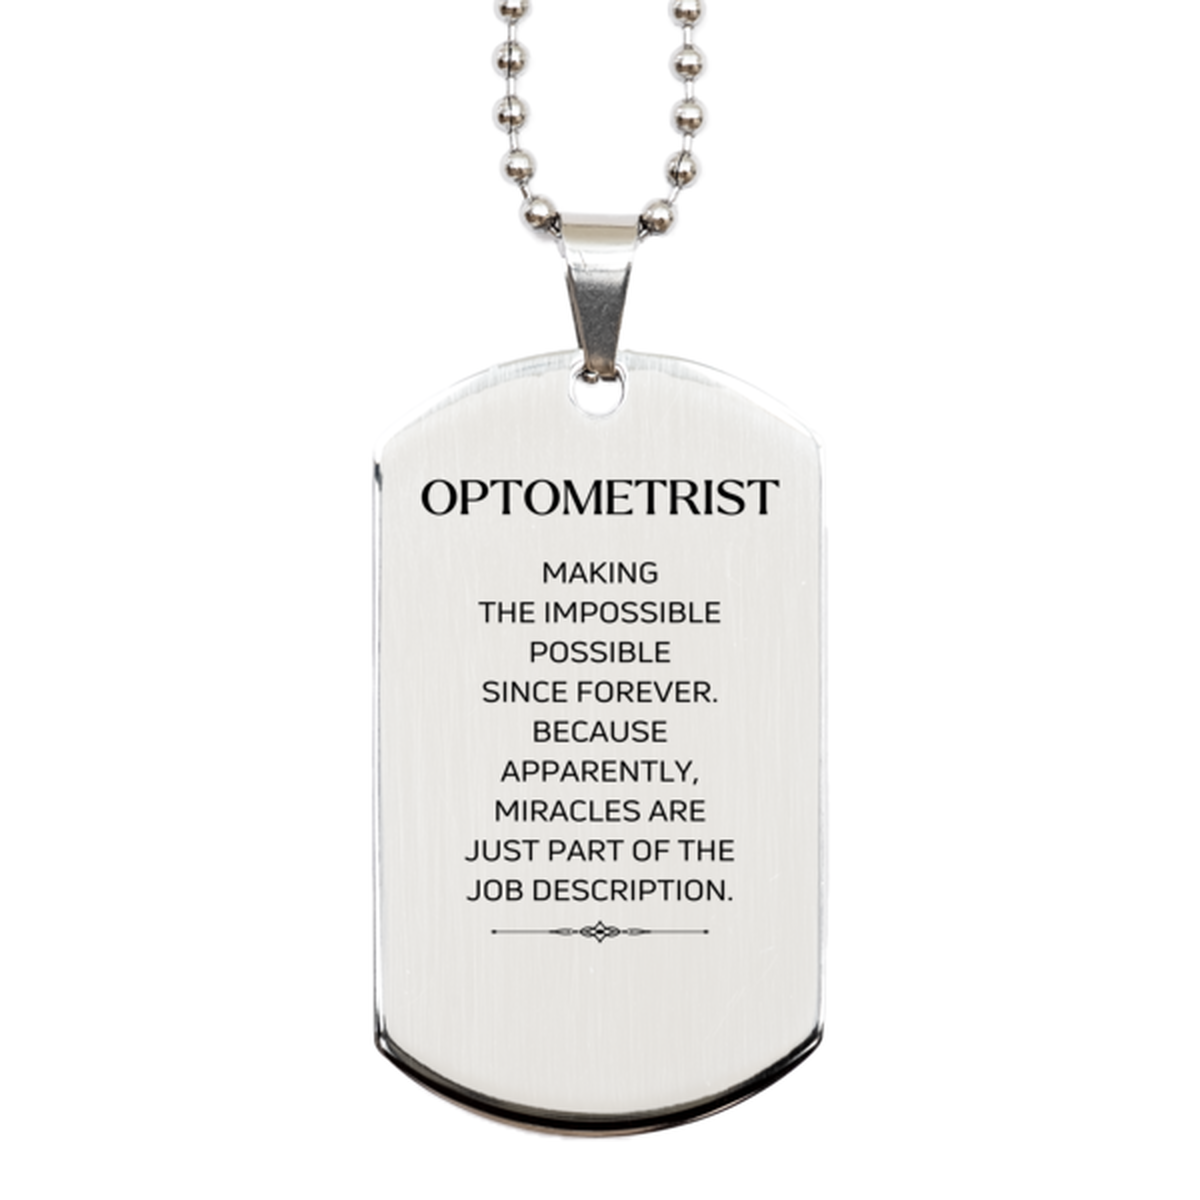 Funny Optometrist Gifts, Miracles are just part of the job description, Inspirational Birthday Silver Dog Tag For Optometrist, Men, Women, Coworkers, Friends, Boss